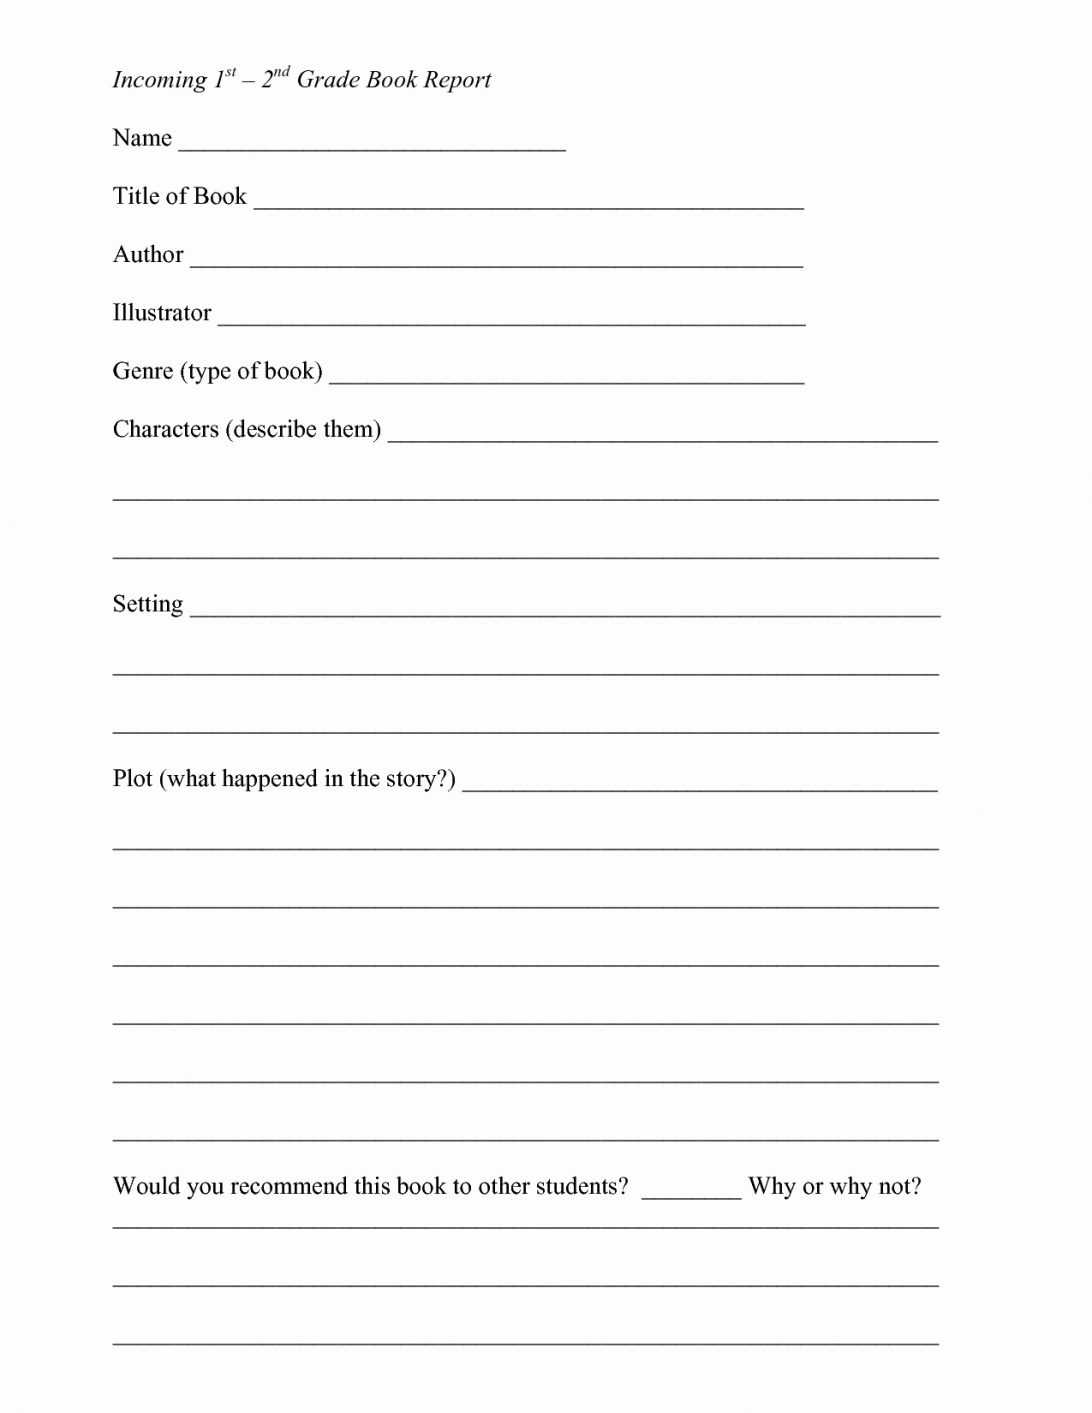 Fiction Book Report Template 6Th Grade For 7Th Graders Pdf Throughout College Book Report Template